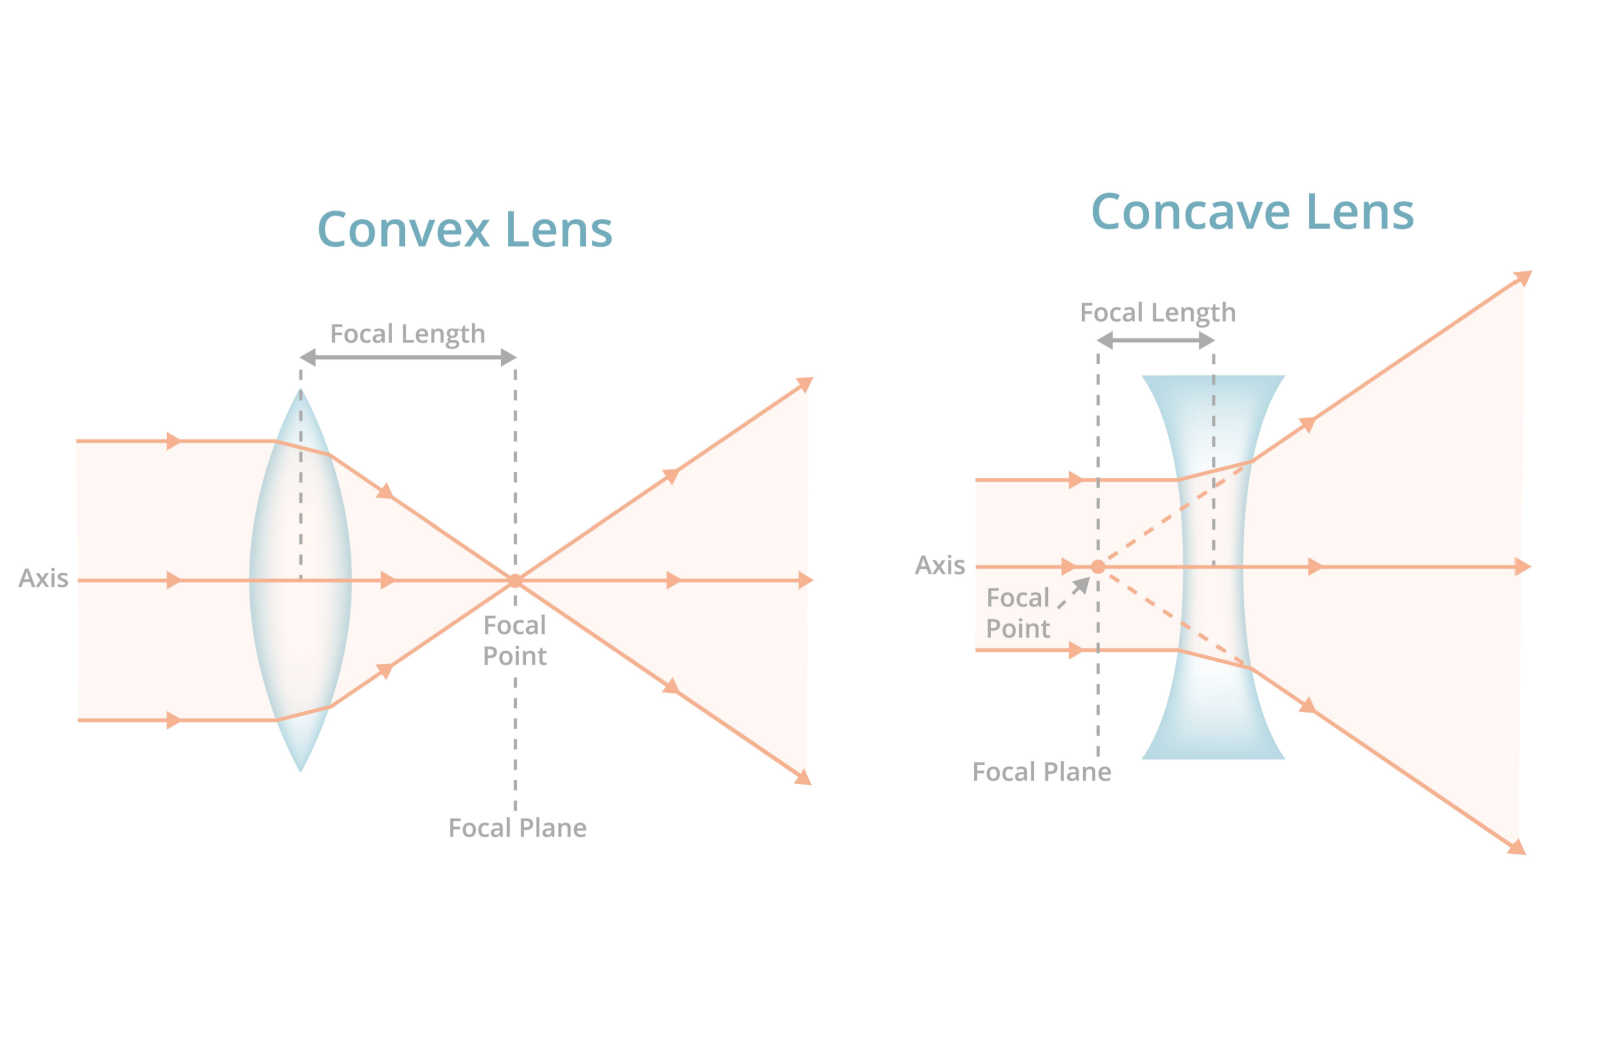 Graphical cross section of convex and concave lenses, showing the axes lines, focal length, focal point, and focal plane.